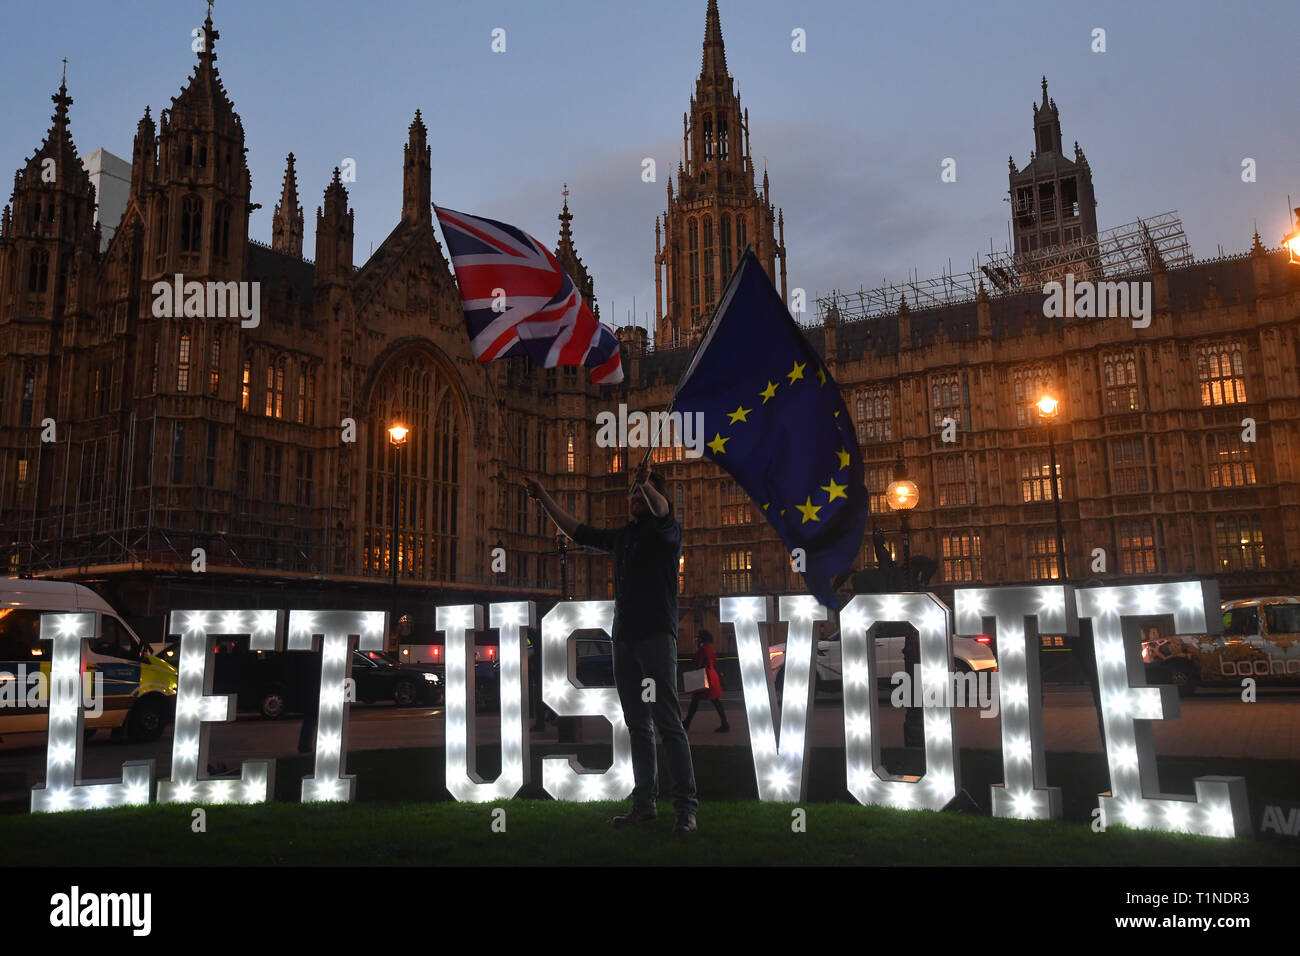 Anti Brexit Protestors With An Illuminated Sign Reading Let Us Vote Outside The Houses Of Parliament London On The Day That Mps Will Be Asked To Consider A Range Of Alternative Brexit Options